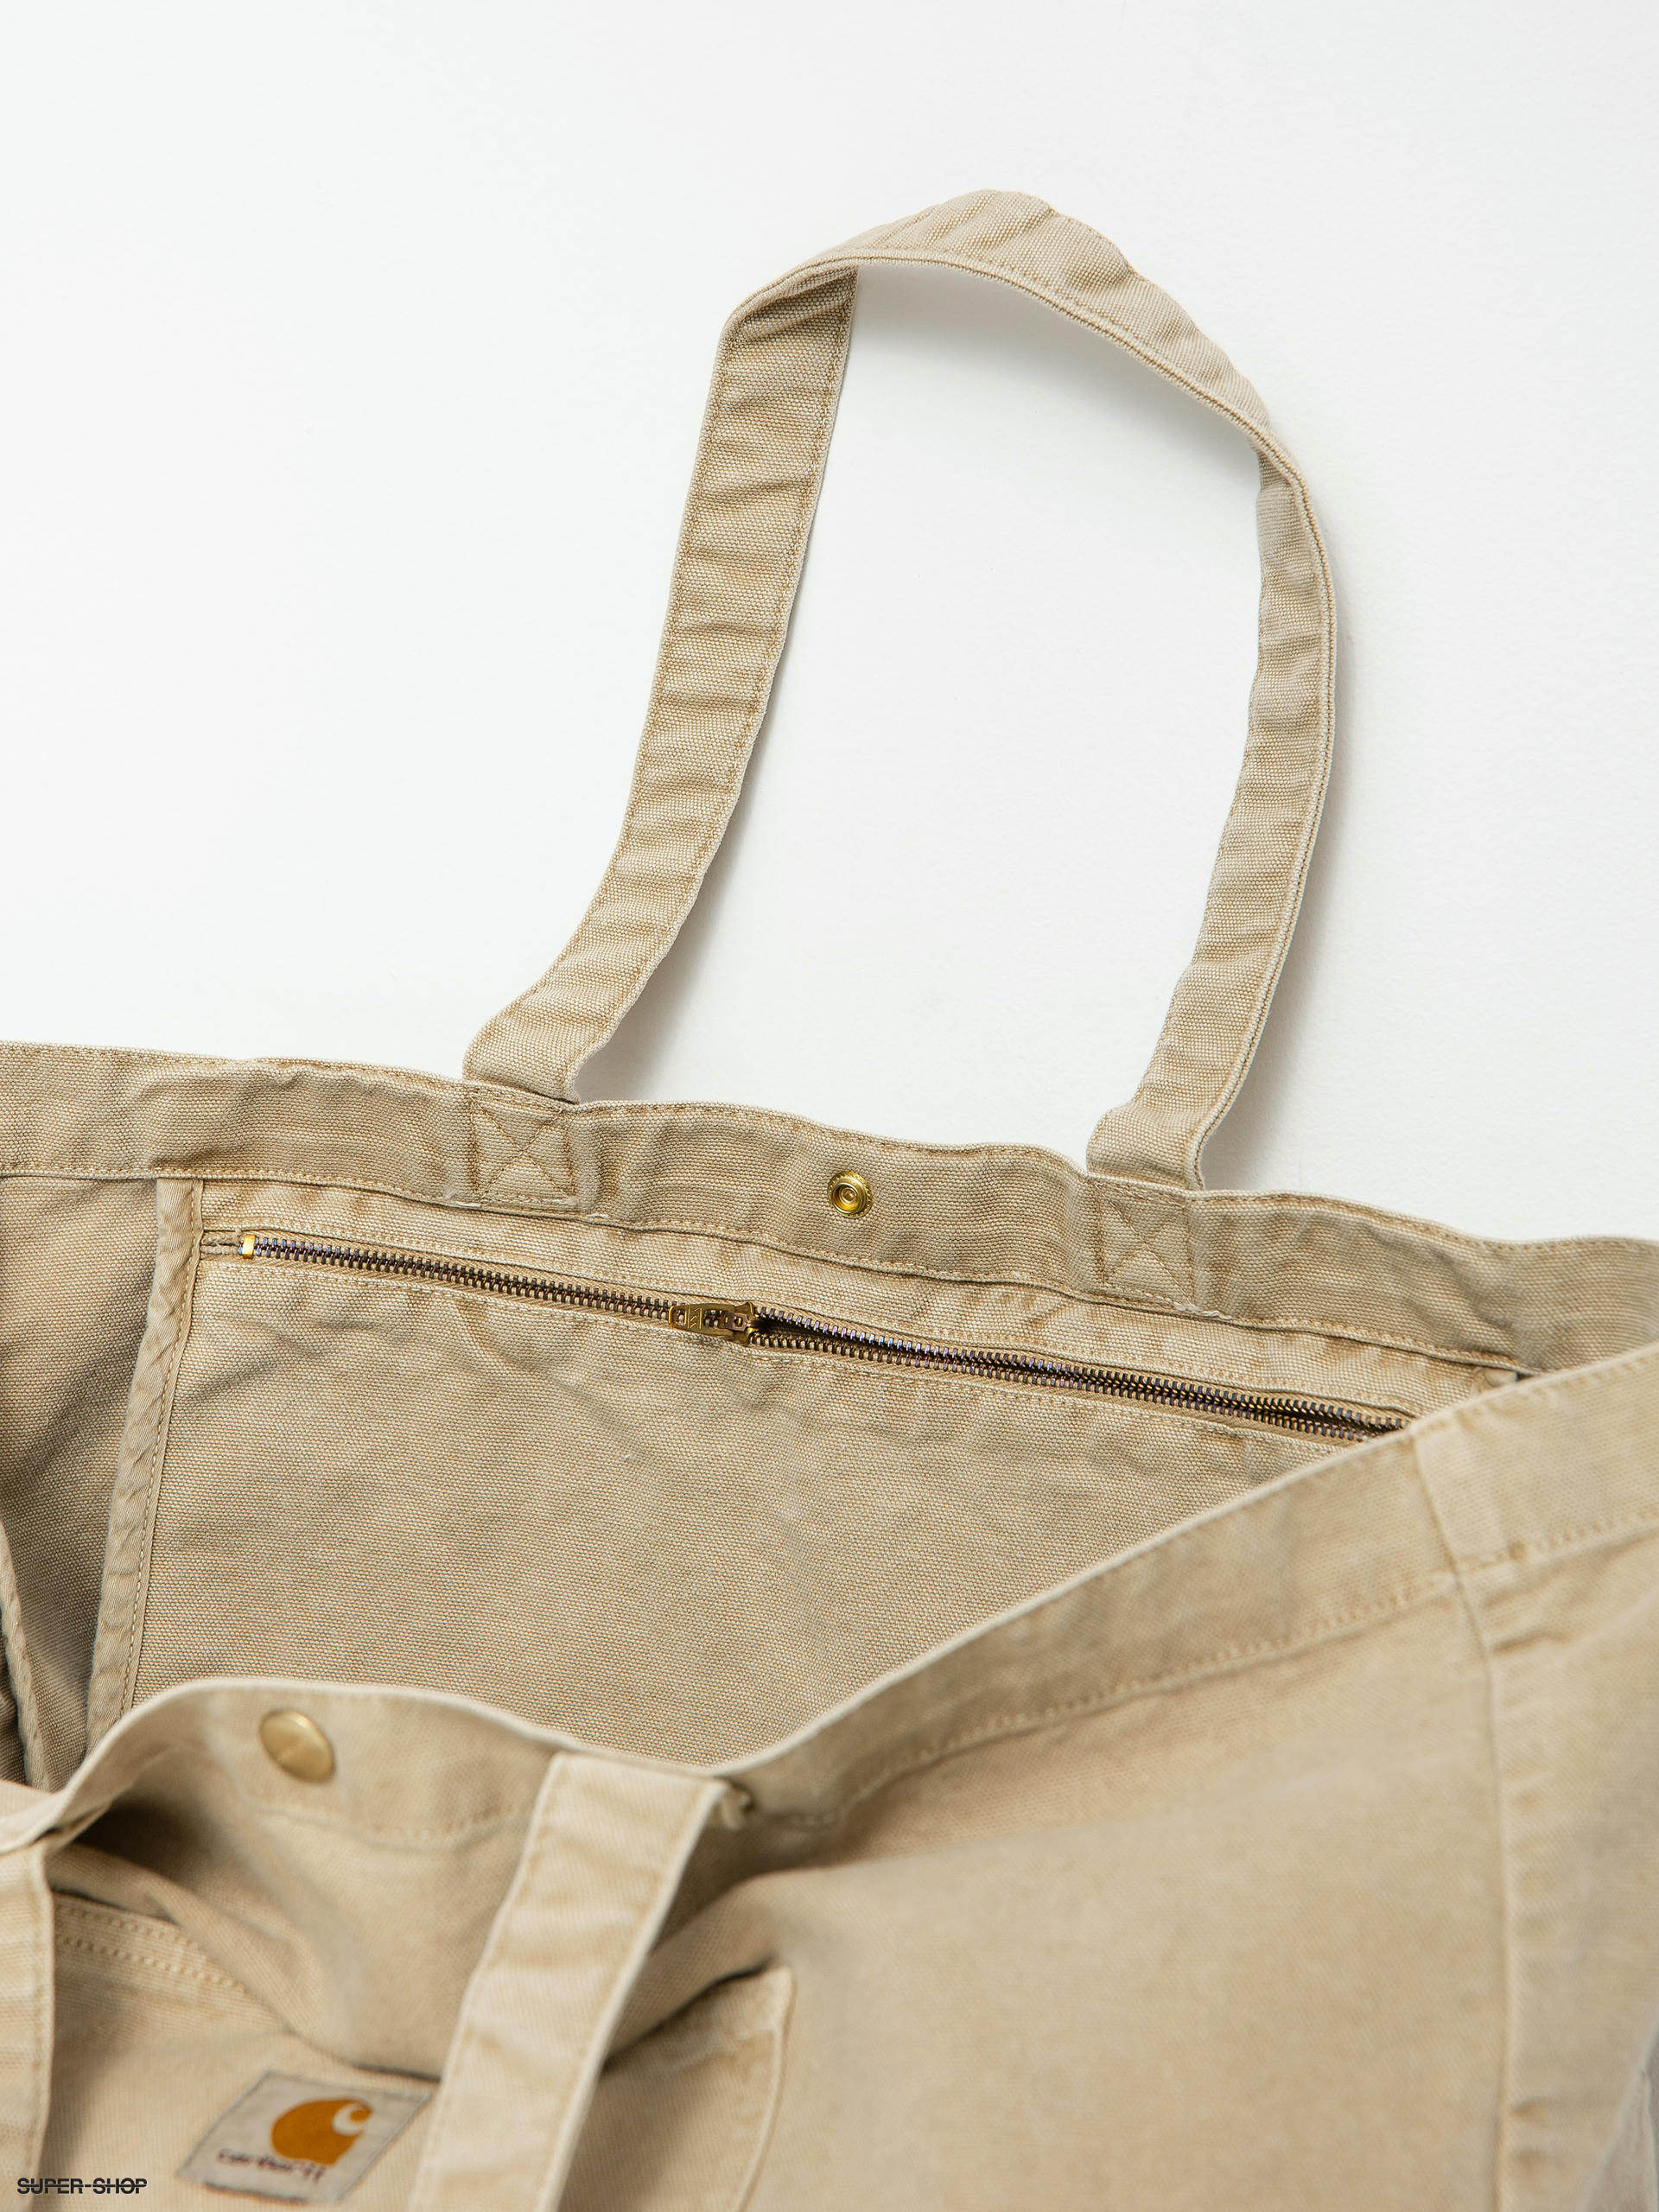 Norse Store  Shipping Worldwide - Carhartt WIP Bayfield Tote Small - Dusty  H Brown